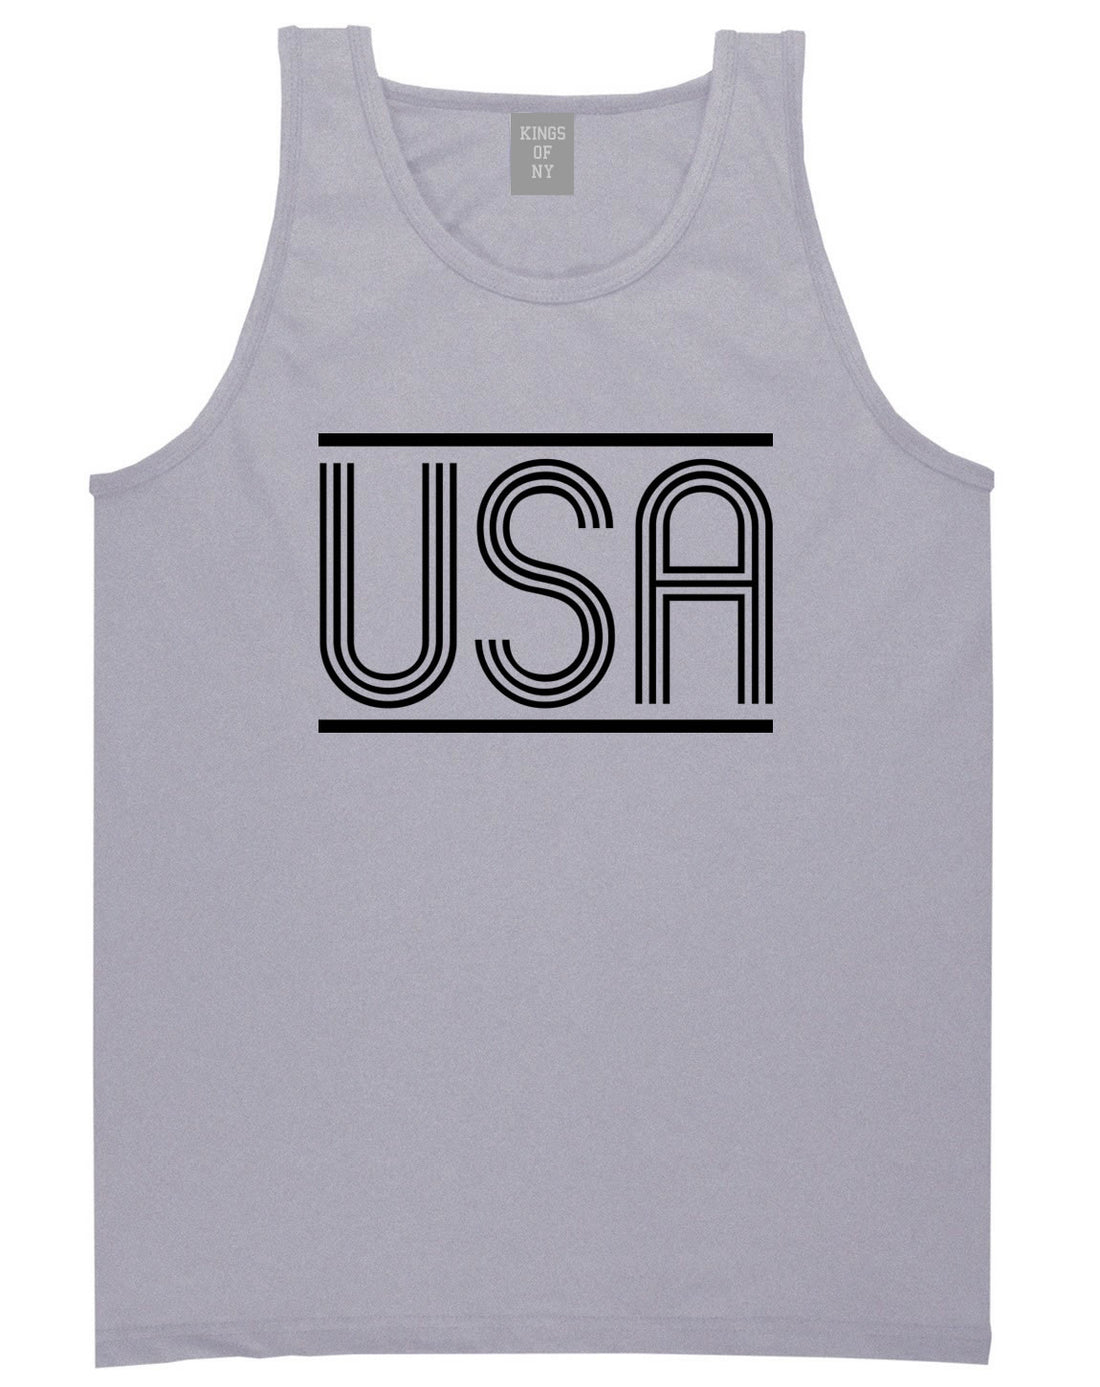 USA America Fall15 Tank Top in Grey by Kings Of NY